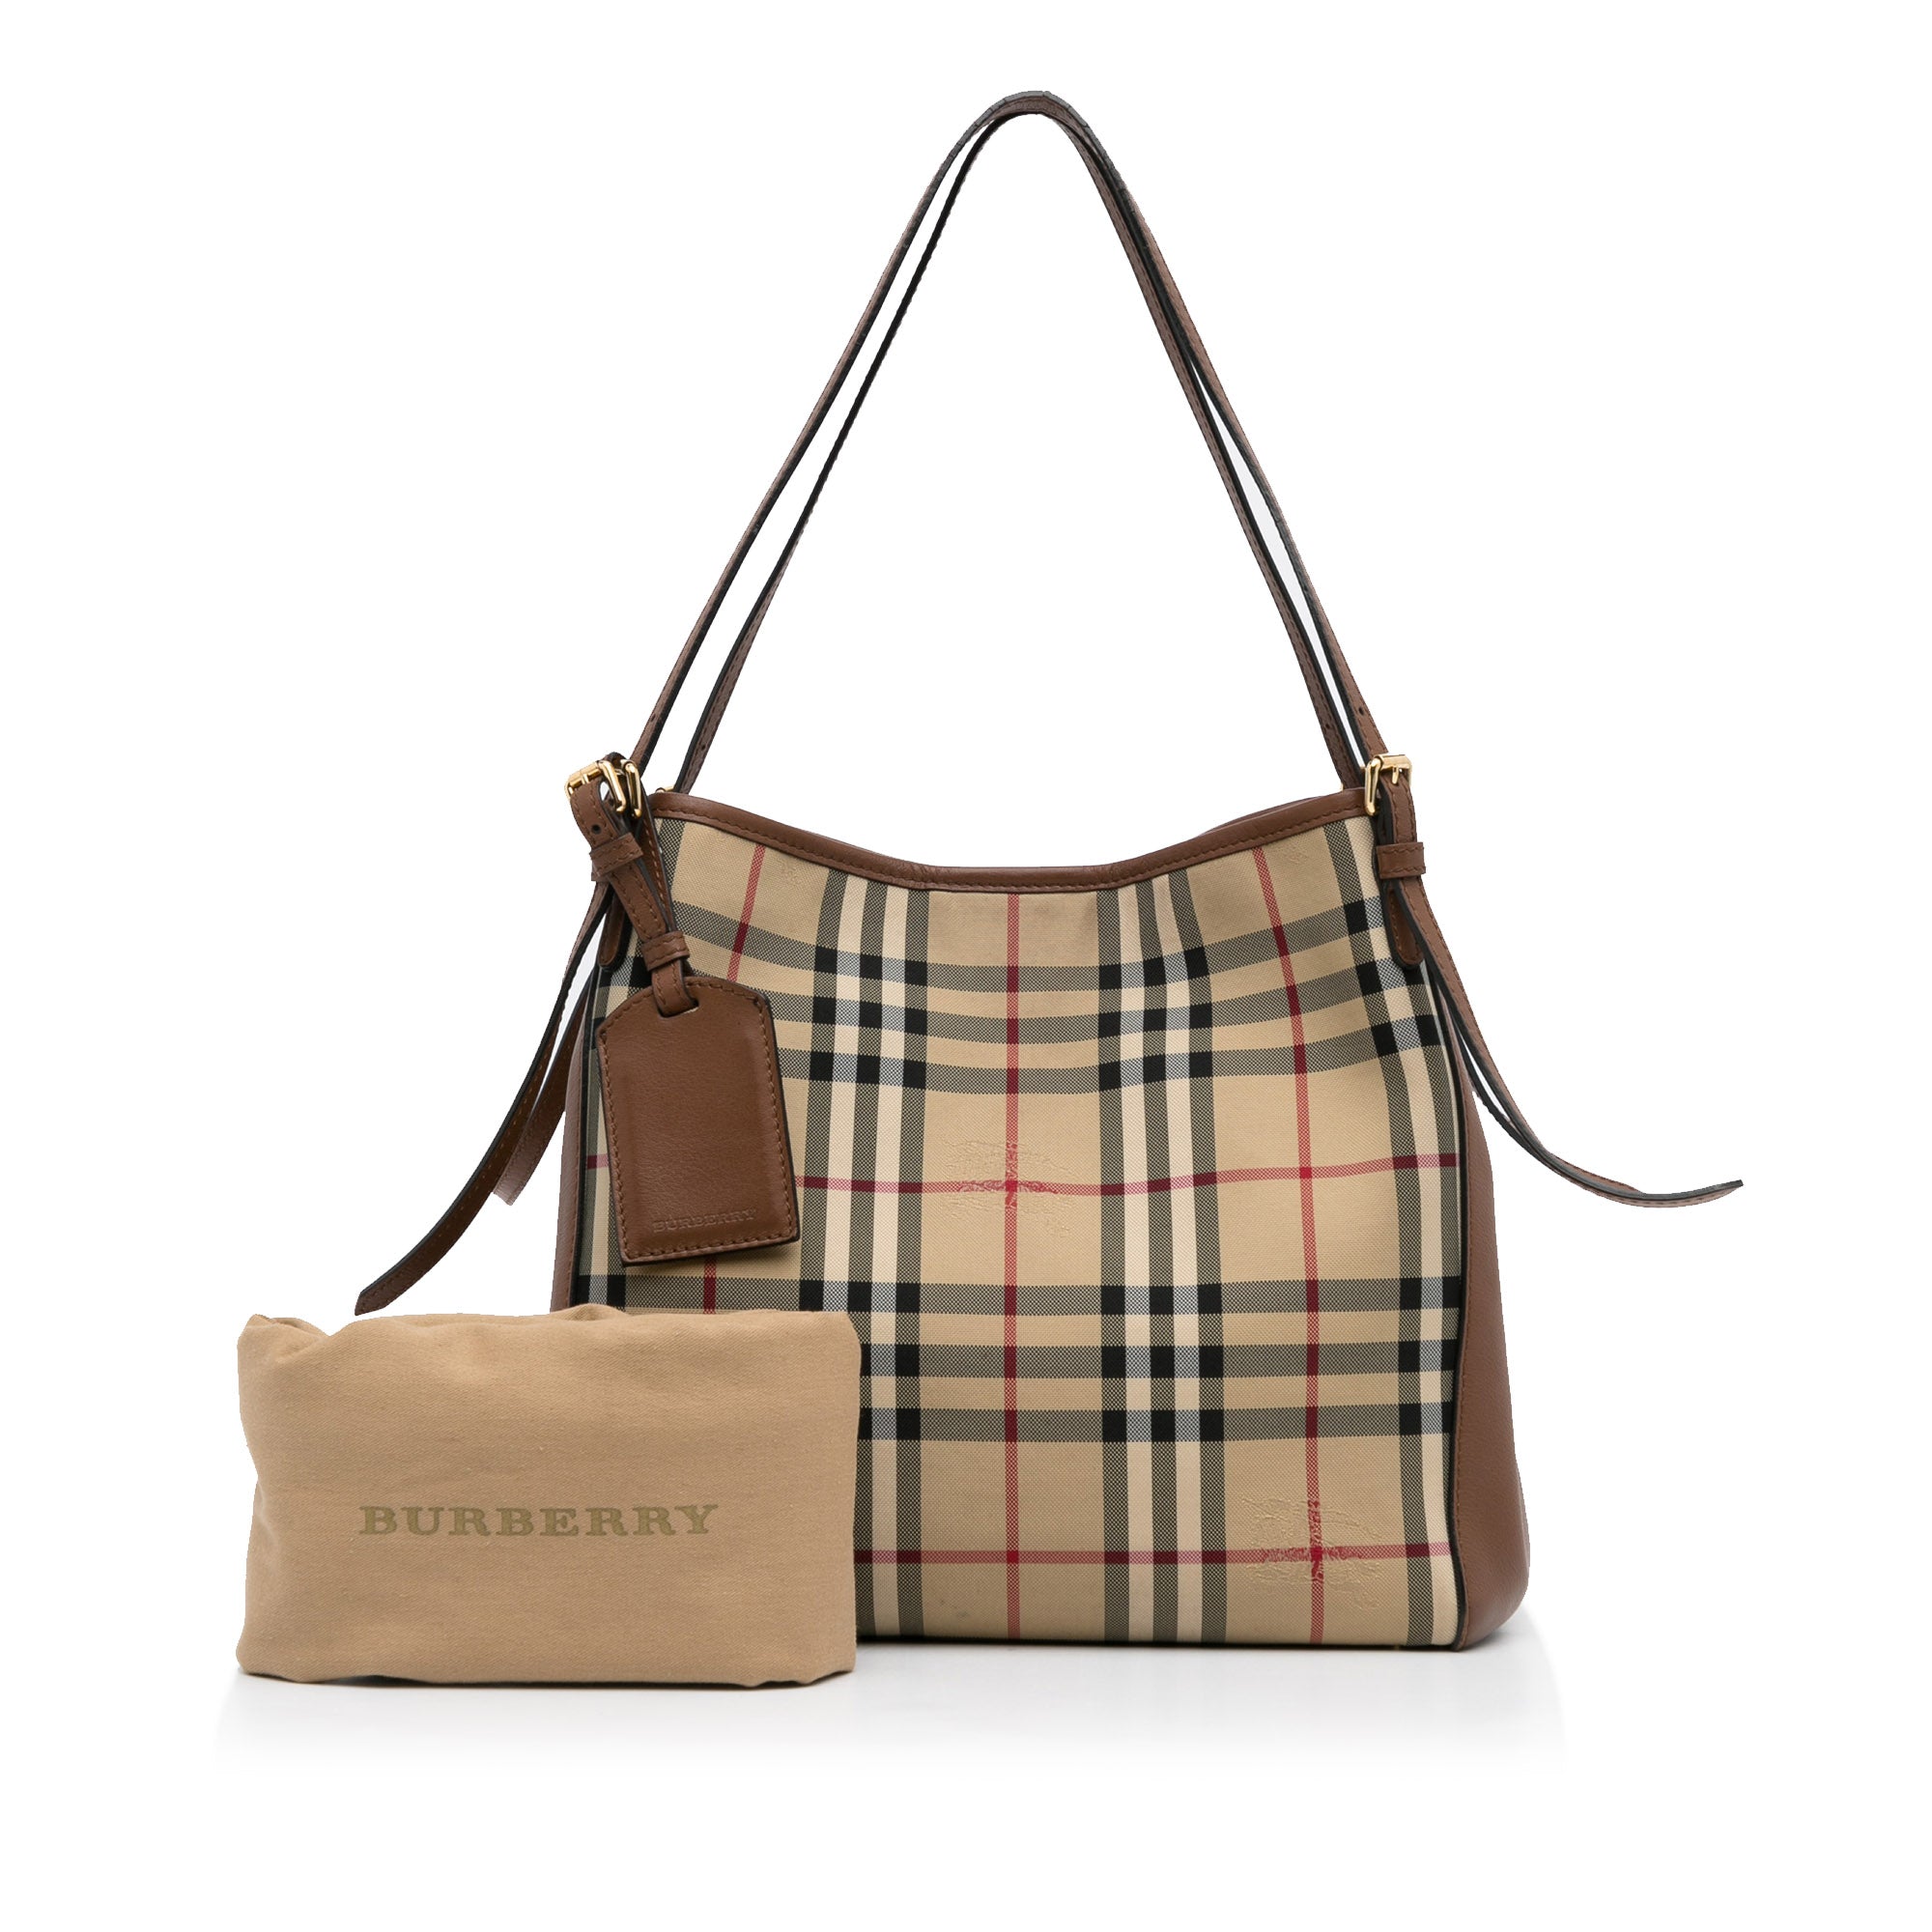 Burberry Canterbury large bag/tote in Haymarket check - clothing